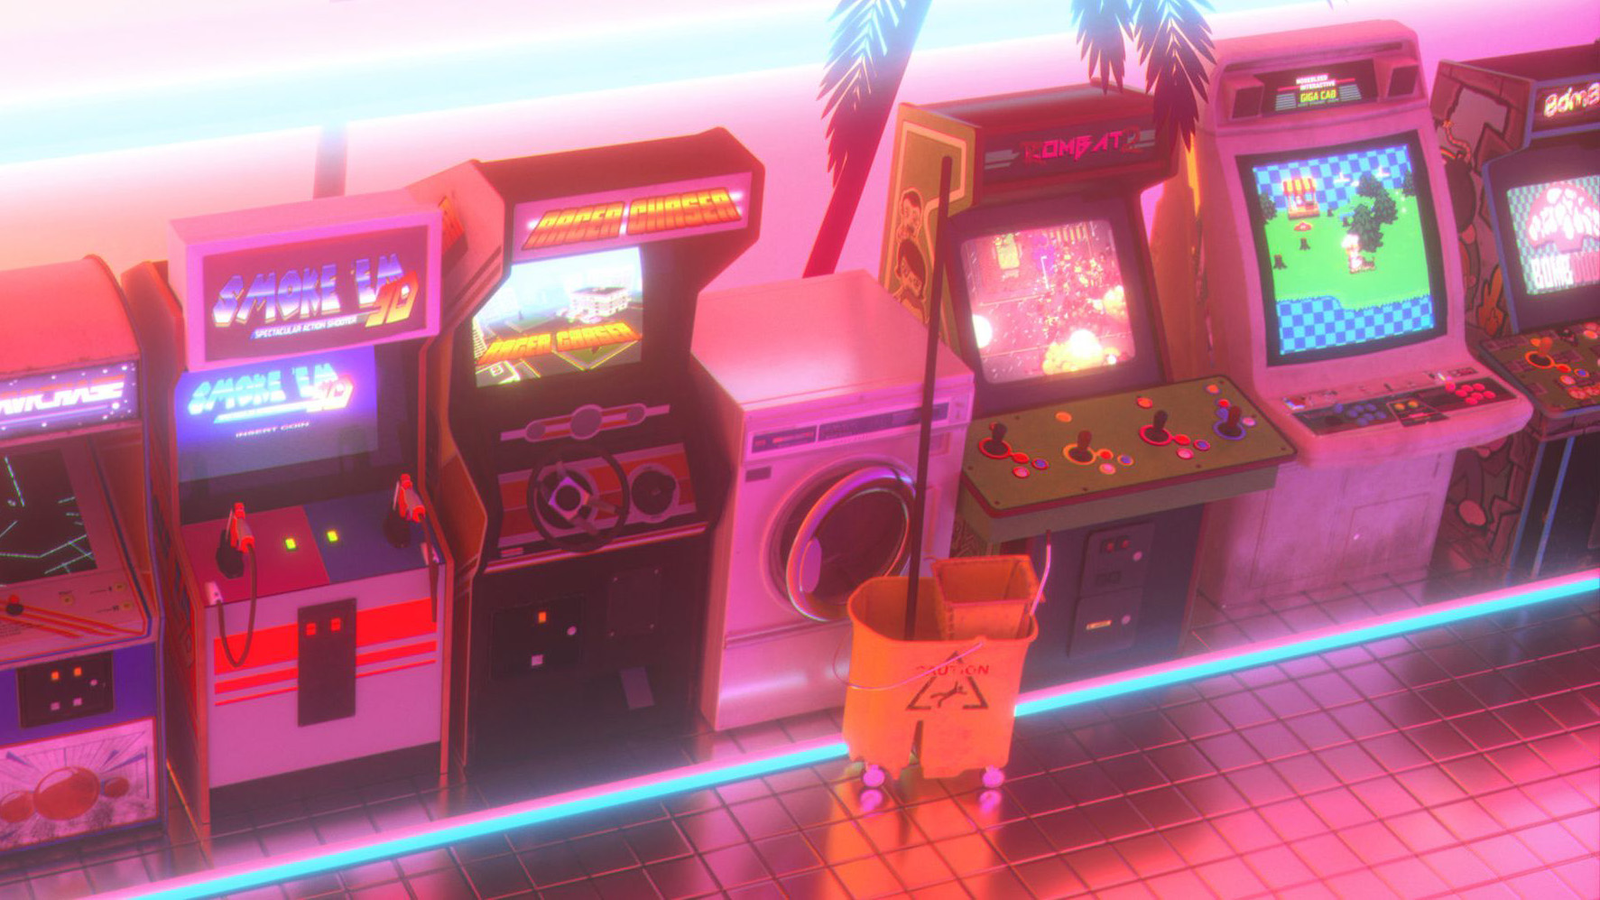 You can now play 900 arcade games in-browser from the Internet